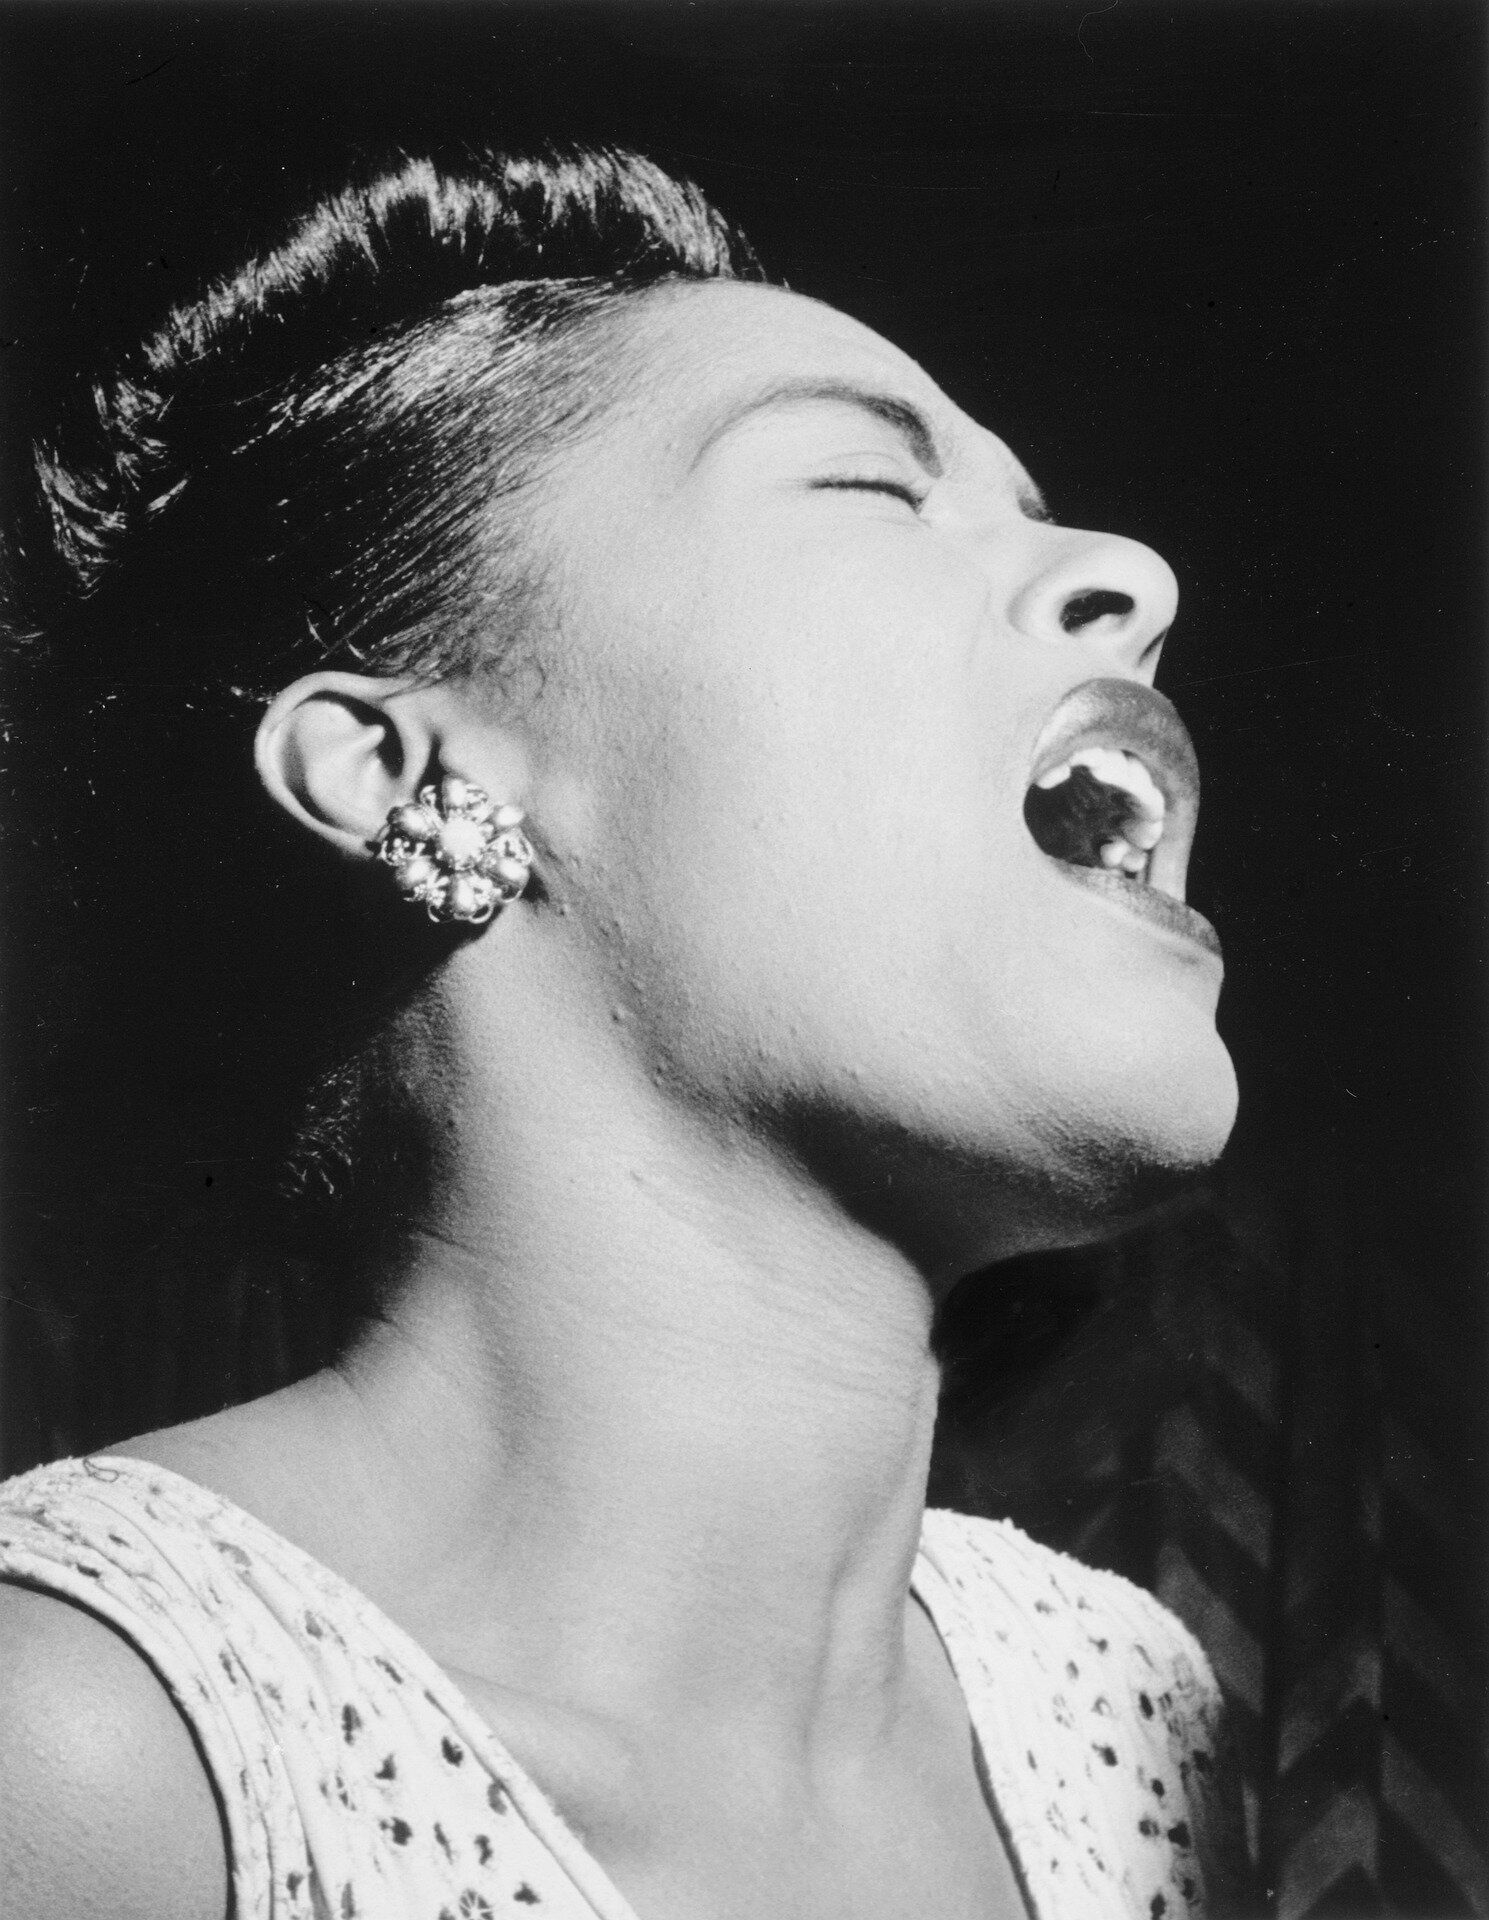 Strange fruit: How Billie Holiday's performance of the anti-lynching song politicized Black consciousness